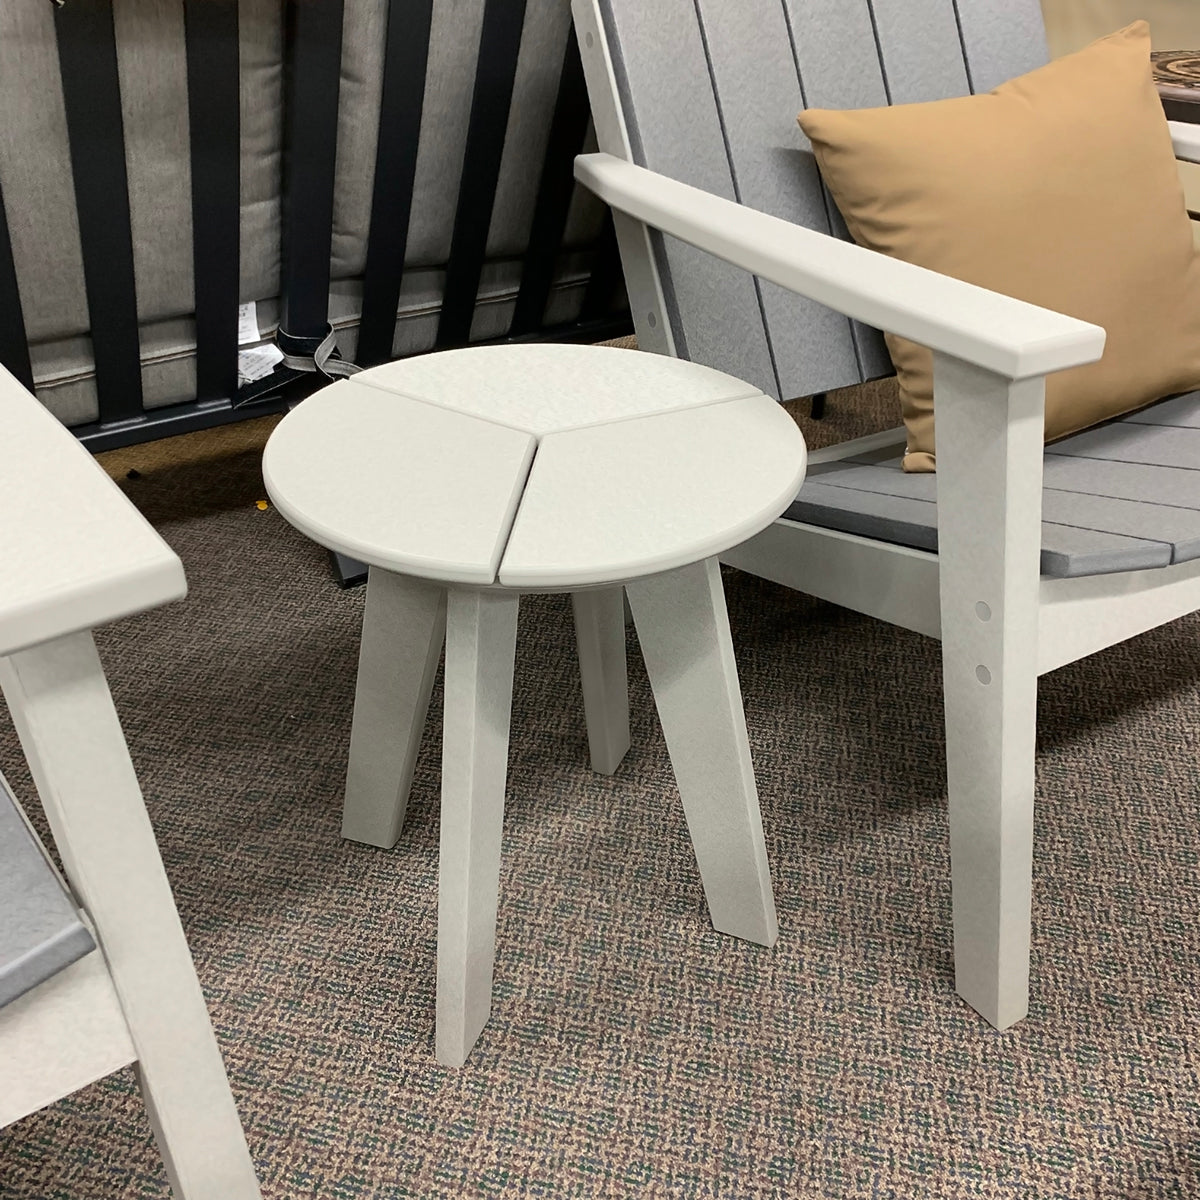 Seaside Casual Dex Patio Side Table is available in our Jacobs Custom Living Spokane Valley Showroom.